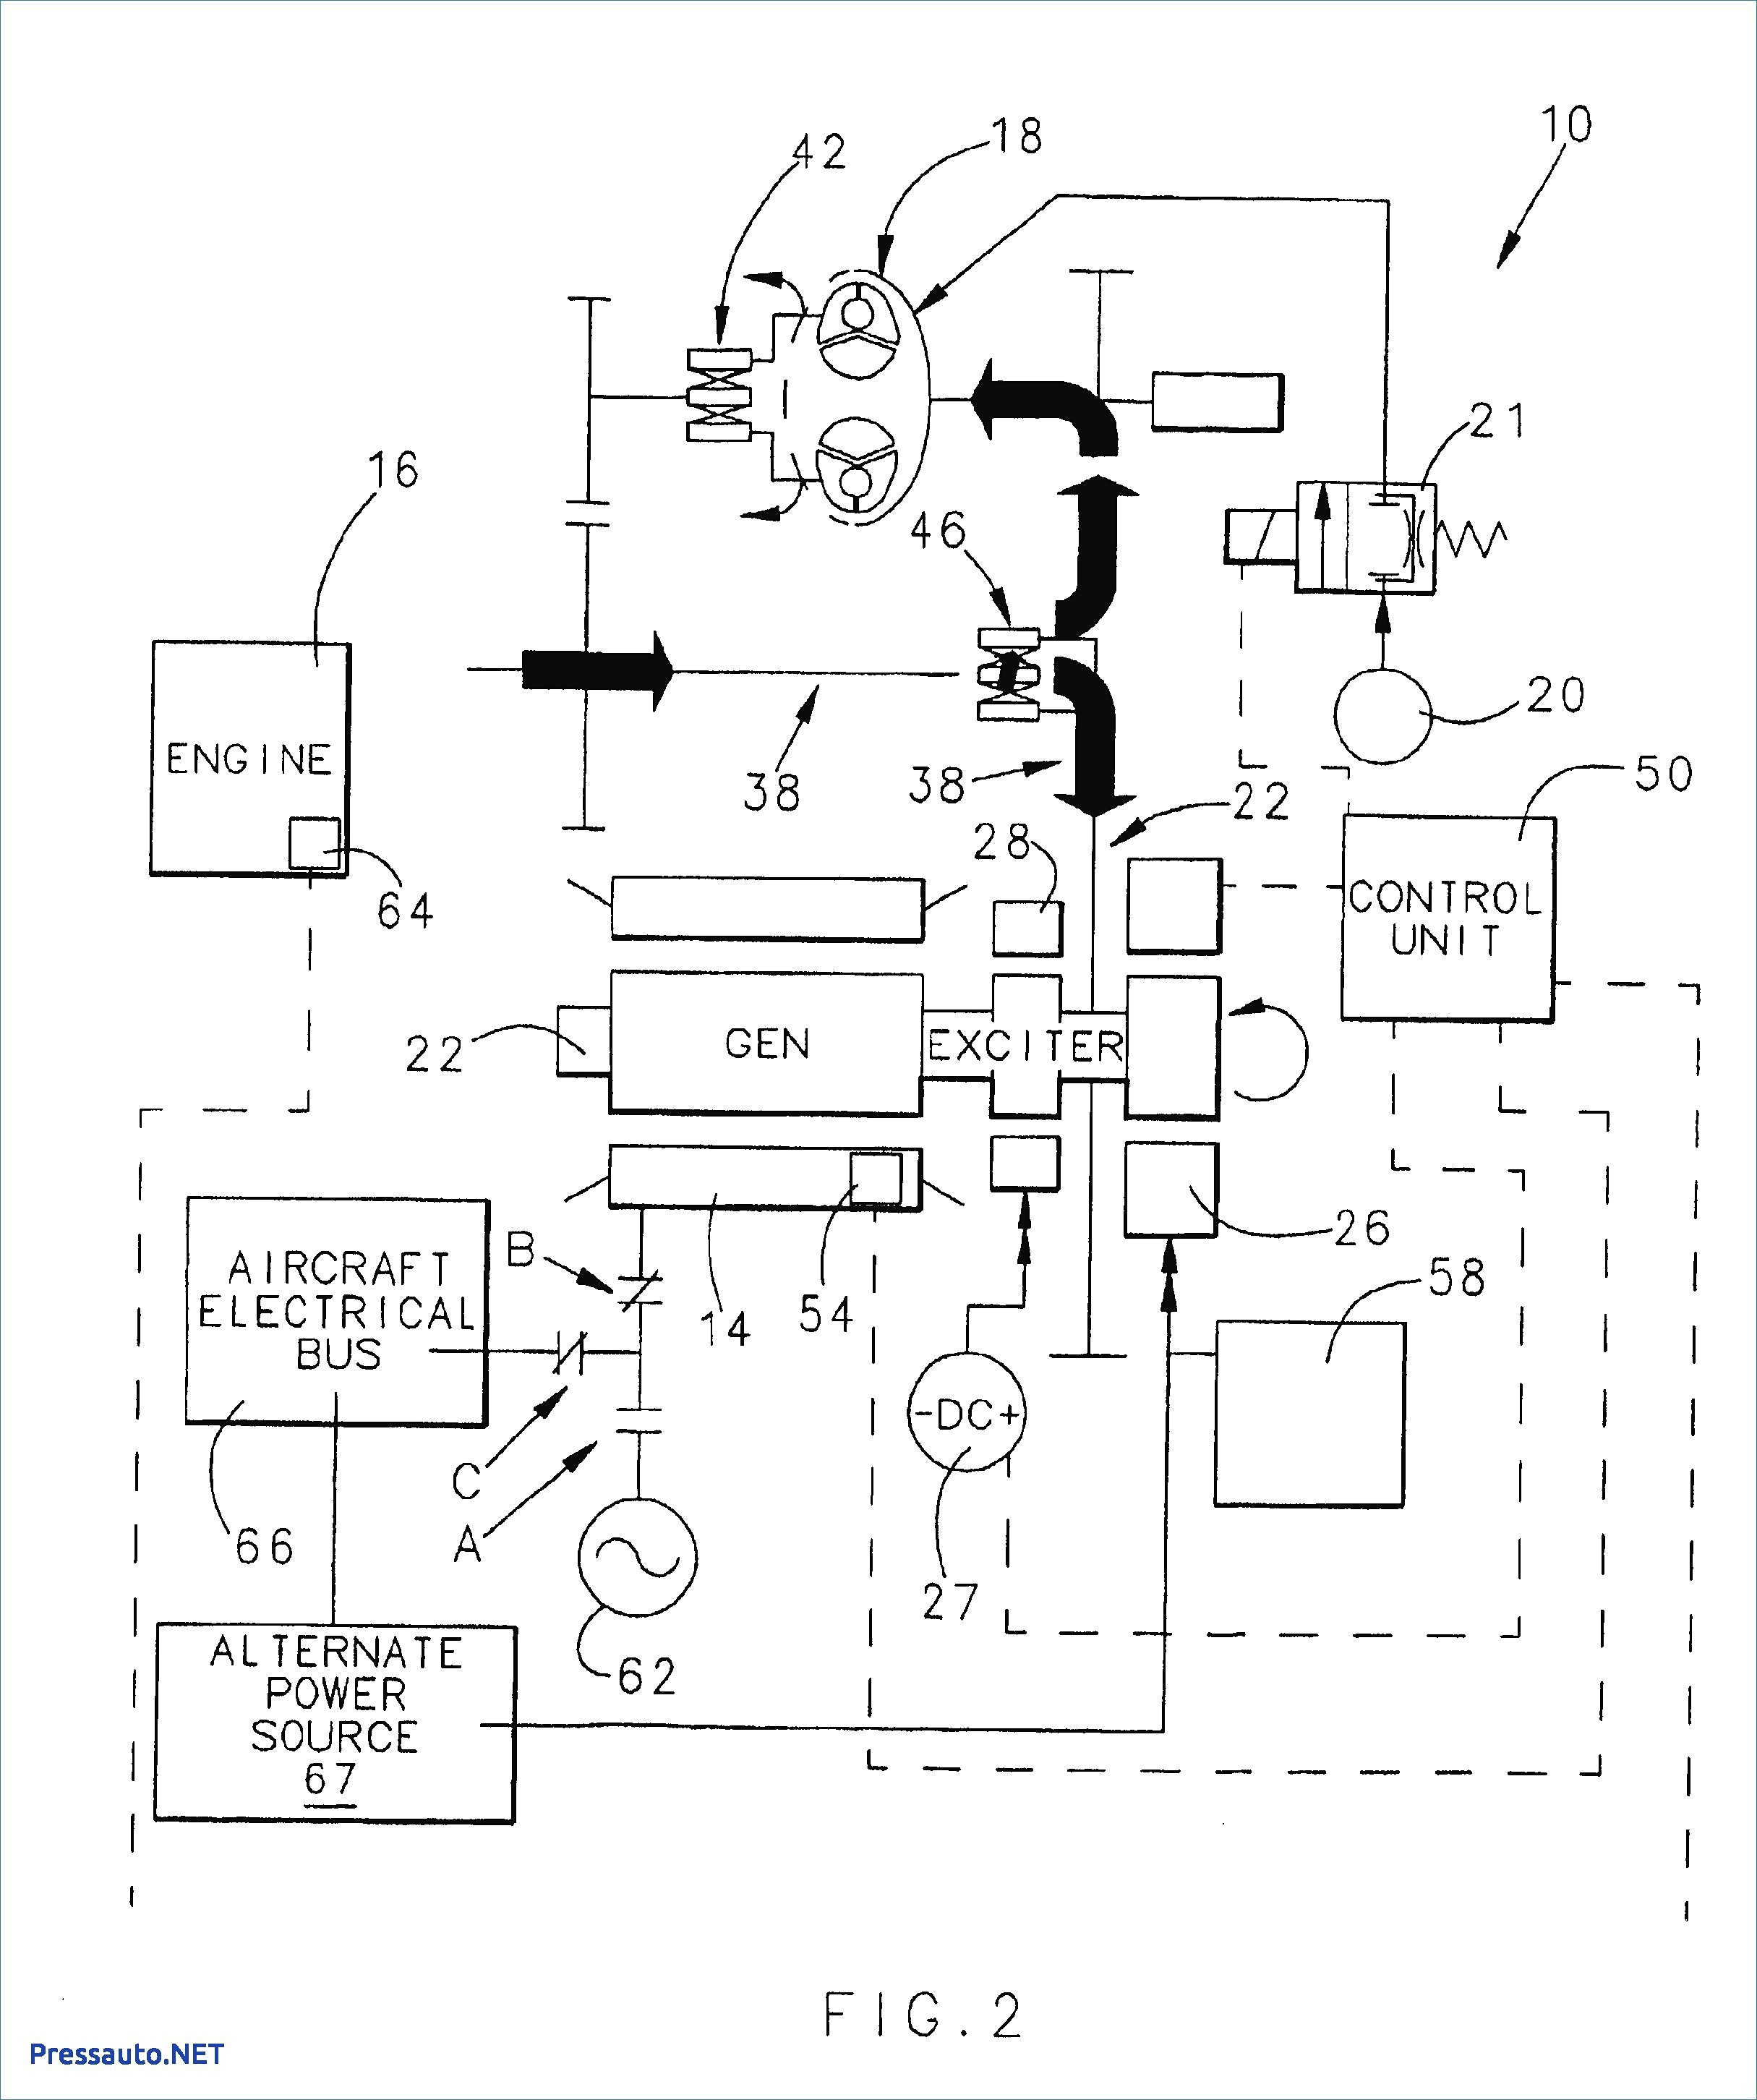 98 ford Explorer Engine Diagram 2002 ford Galaxy Dachtr Ger Montageanleitung Archives Simple Of 98 ford Explorer Engine Diagram